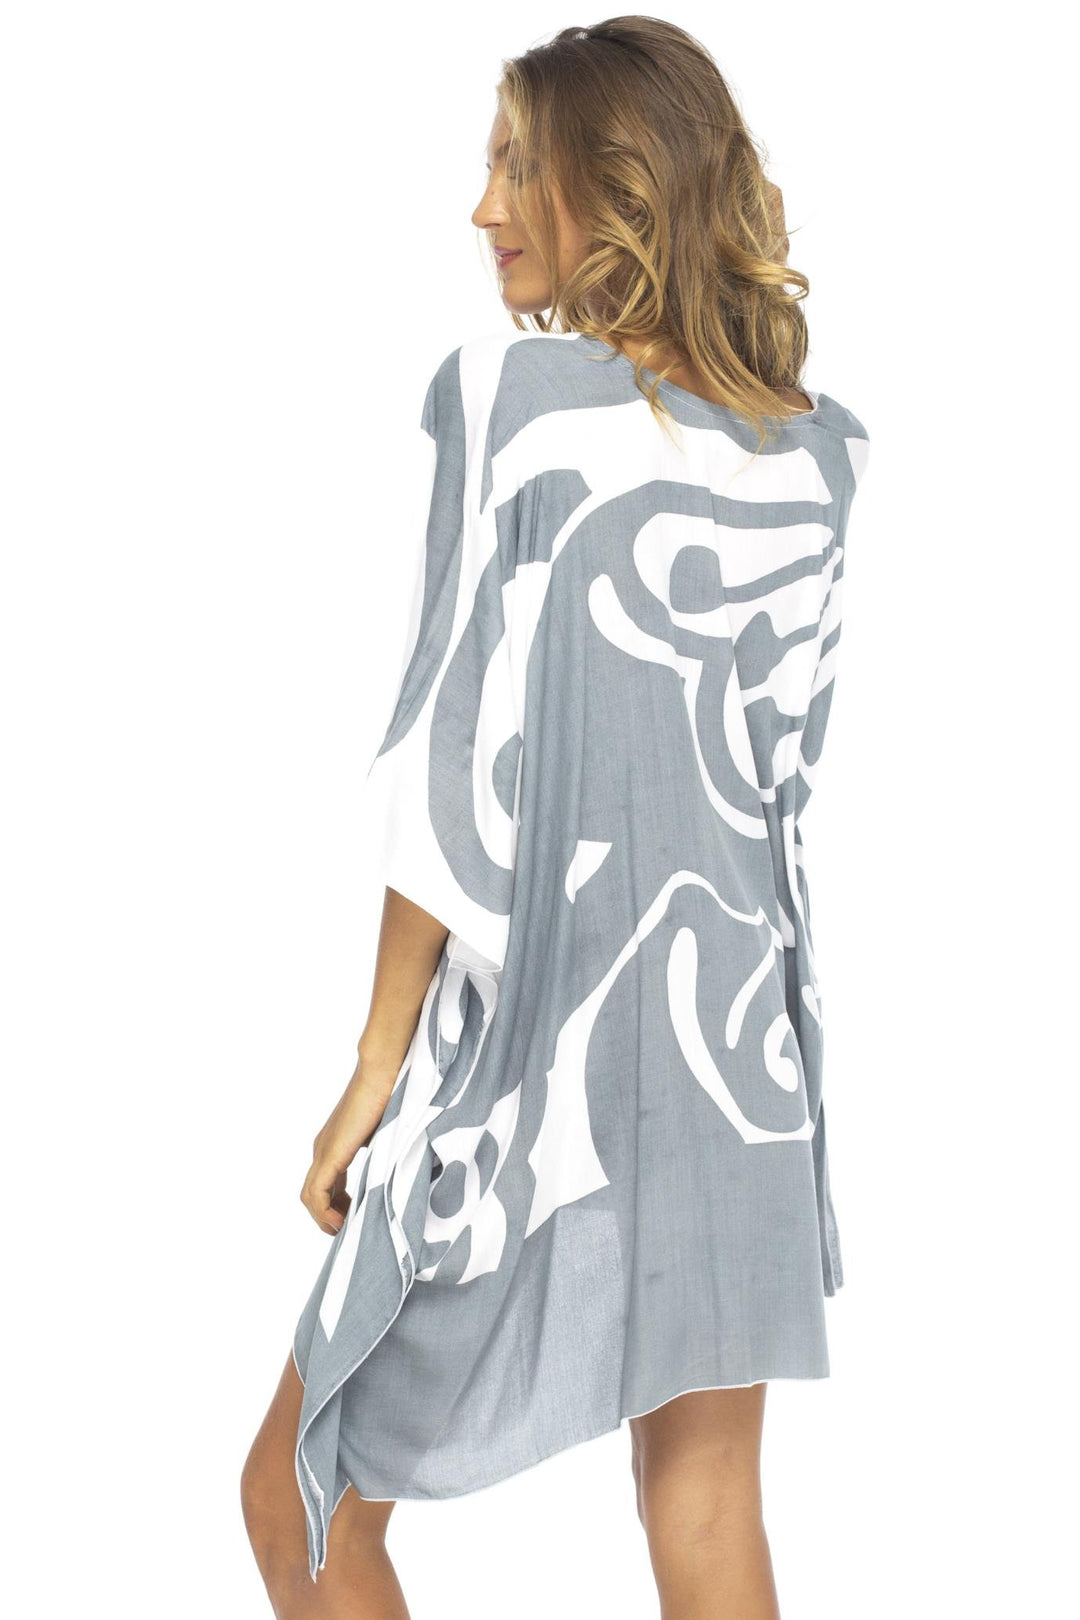 Short Loose Butterfly Print Cover Up Caftan